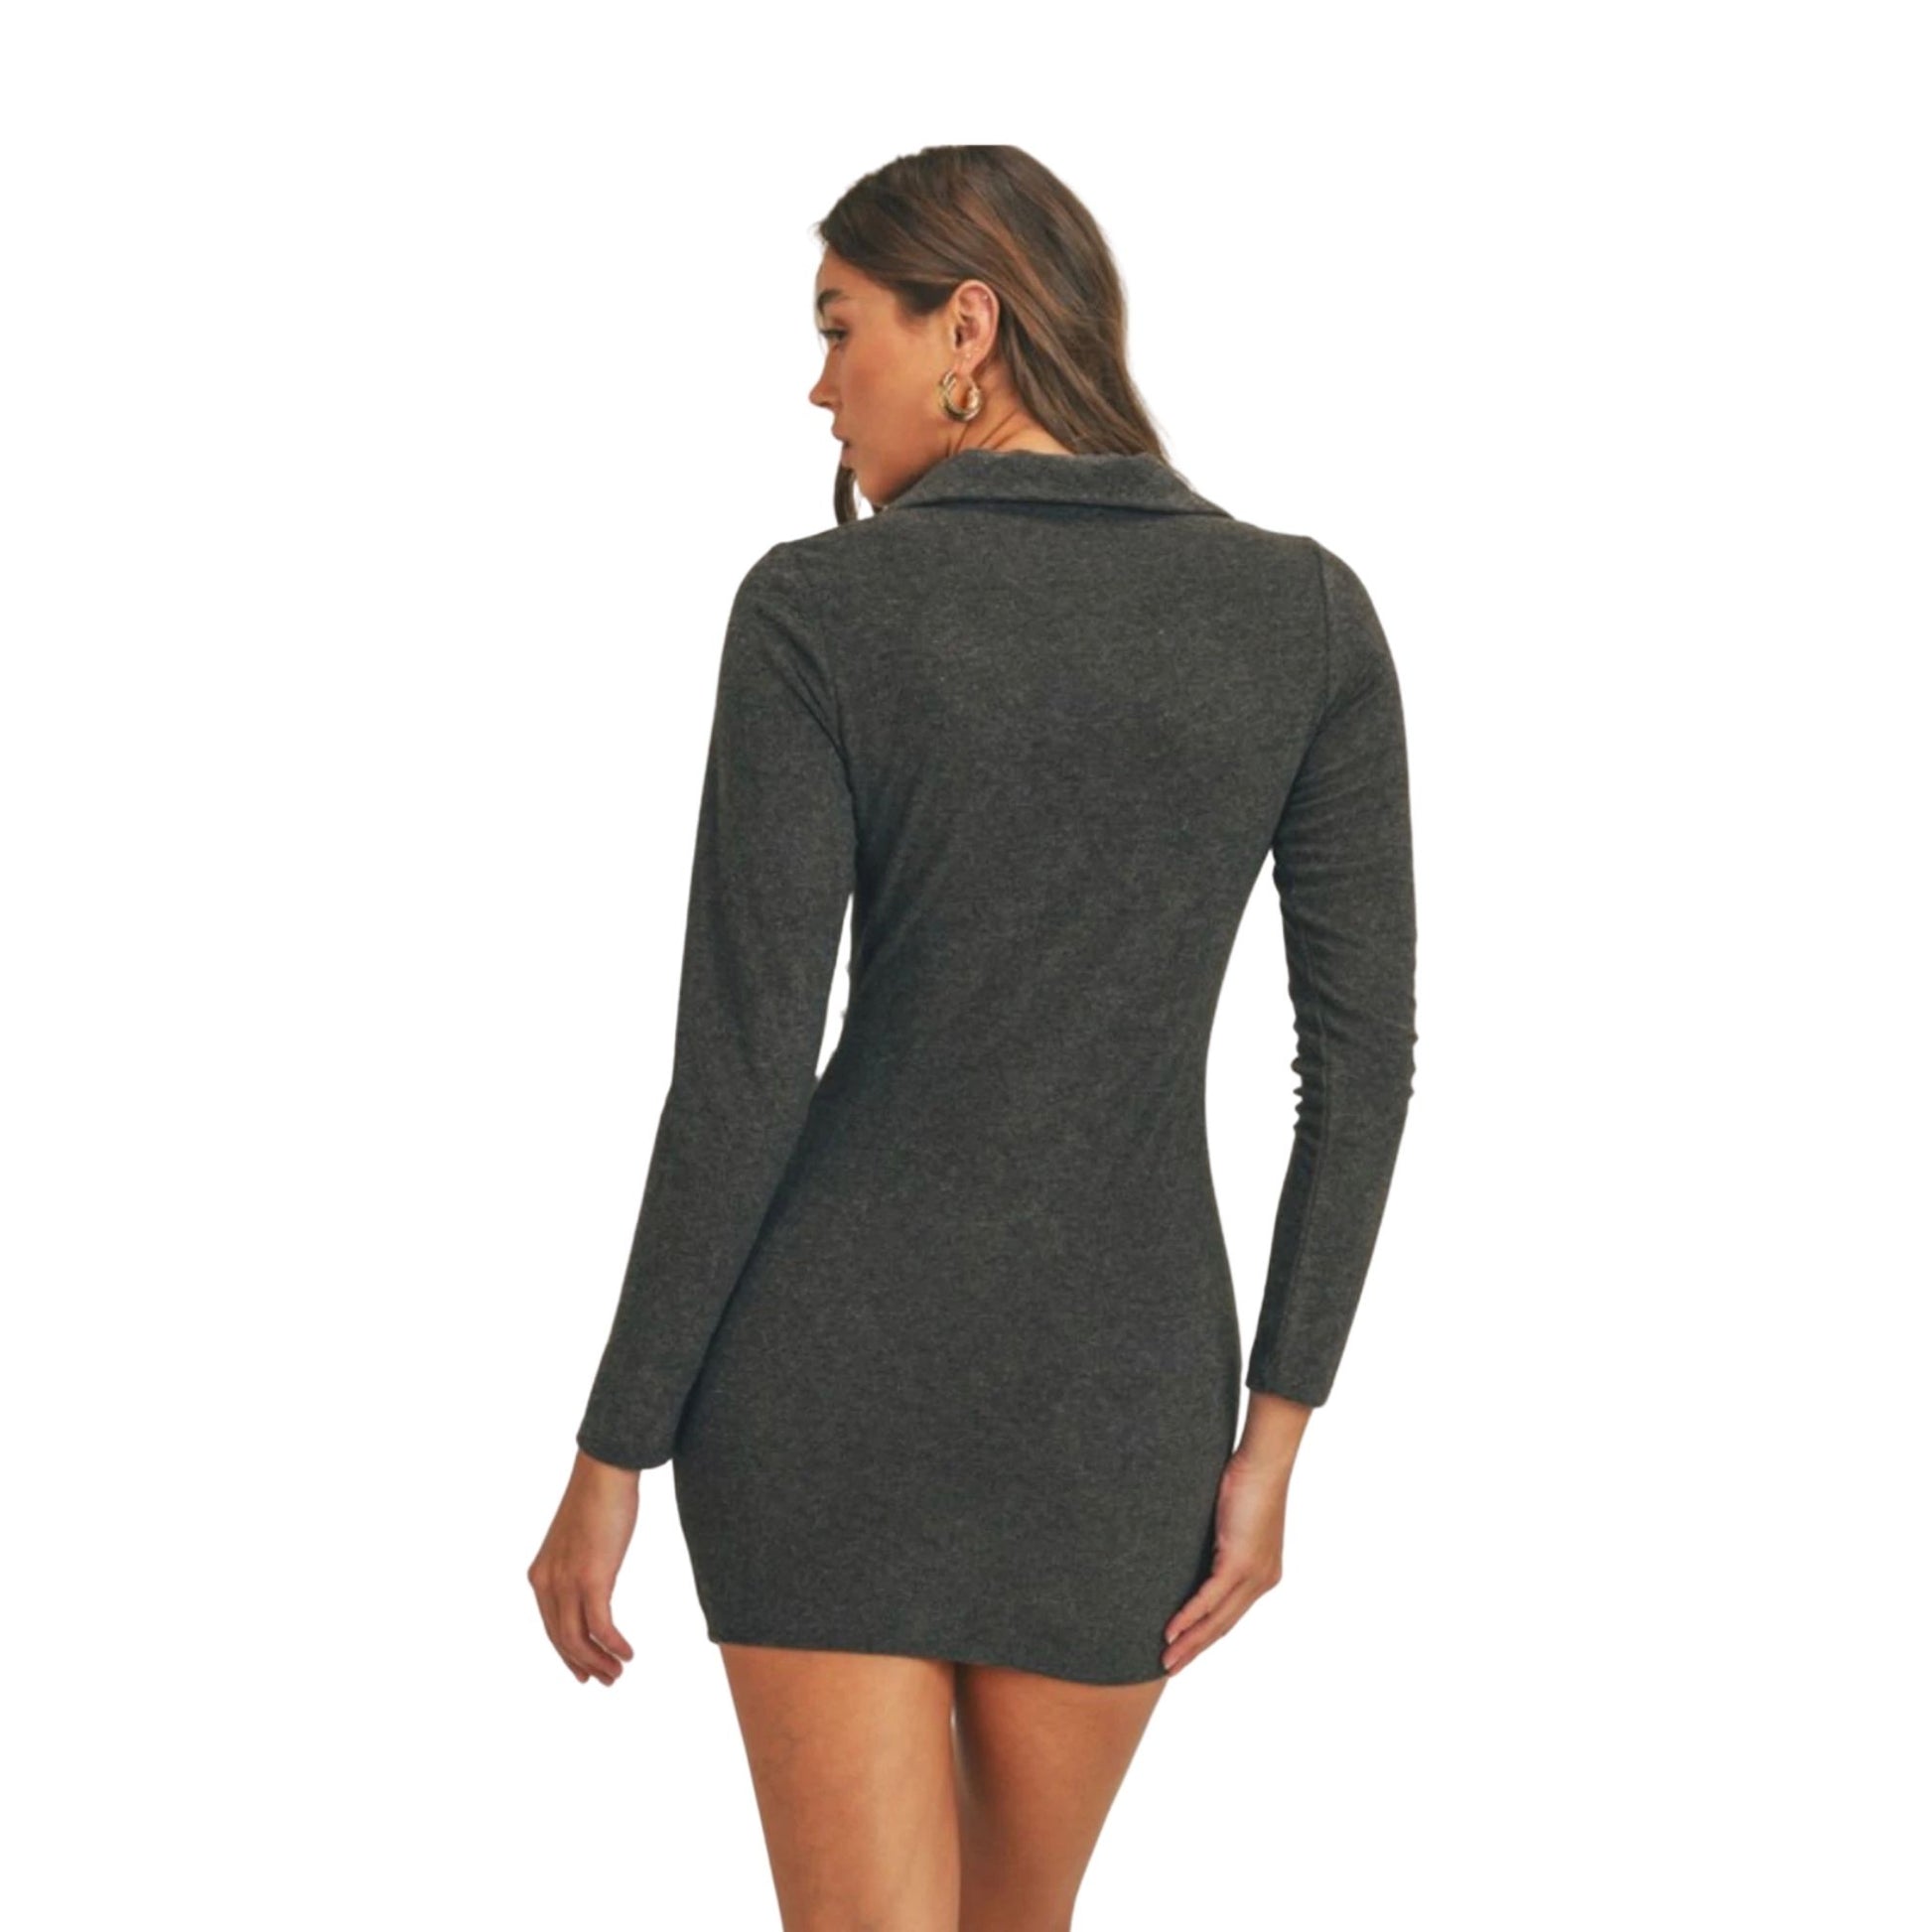 Black Long Sleeve Bodycon Button Up Dress | 8LACK Clothing